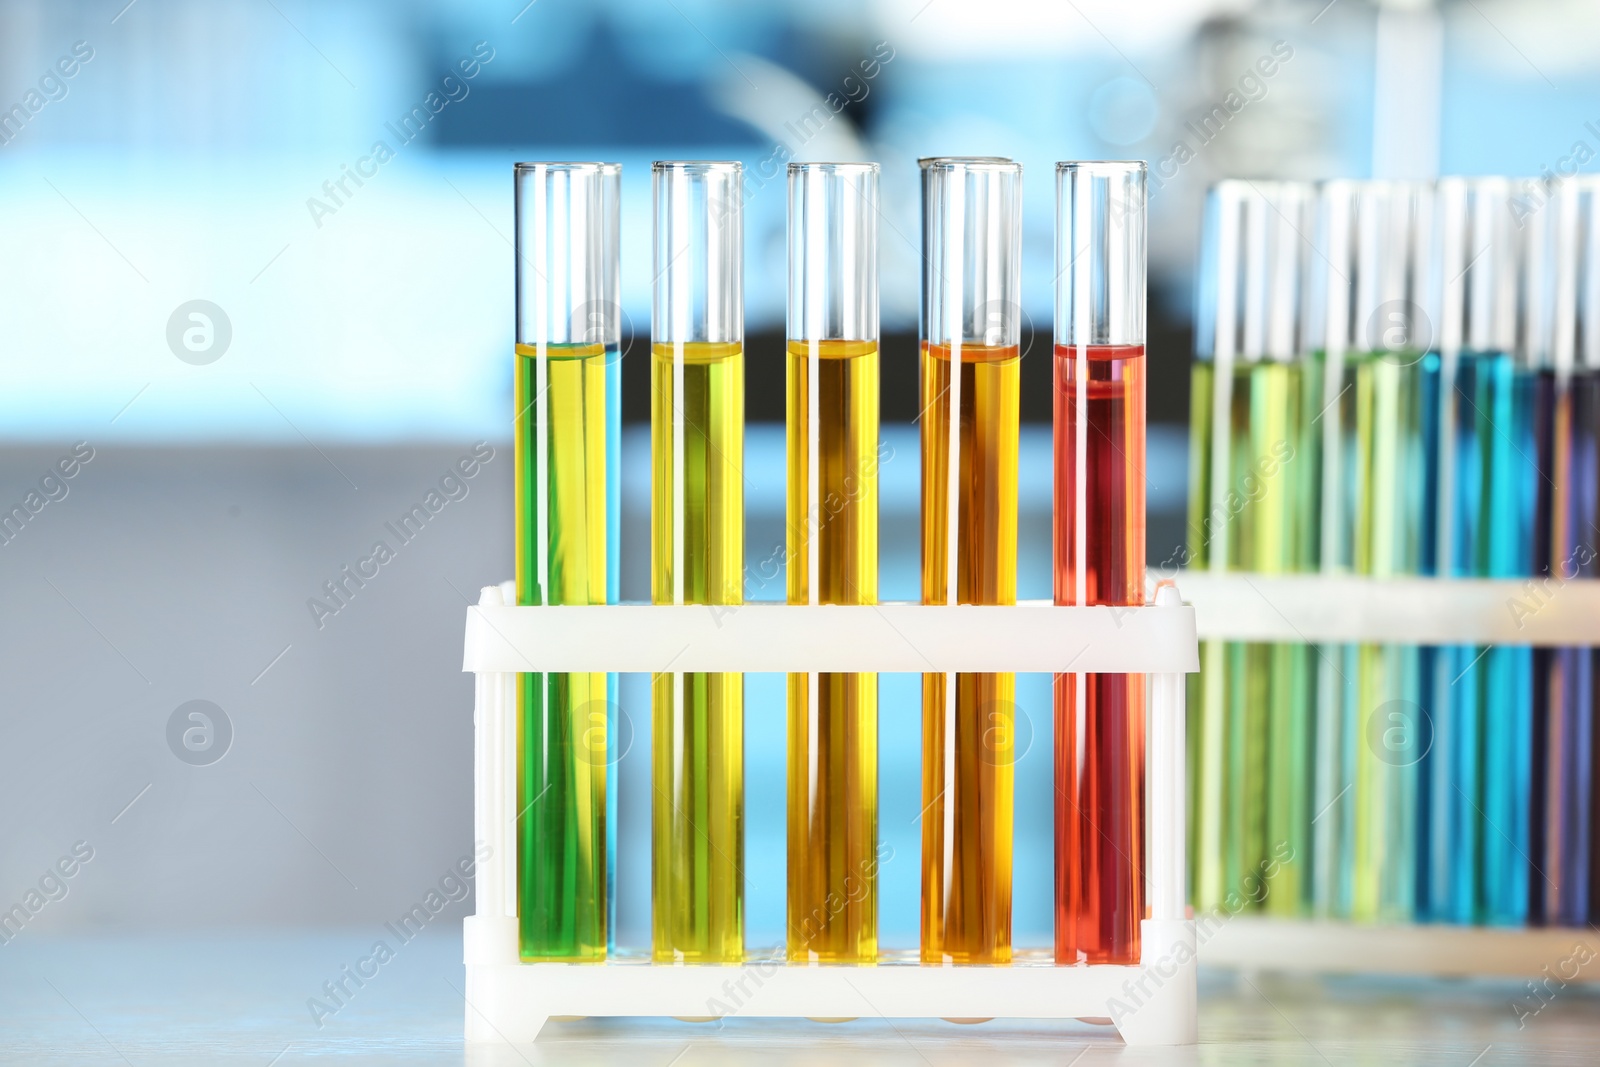 Image of Test tubes with liquid samples on table. Laboratory analysis